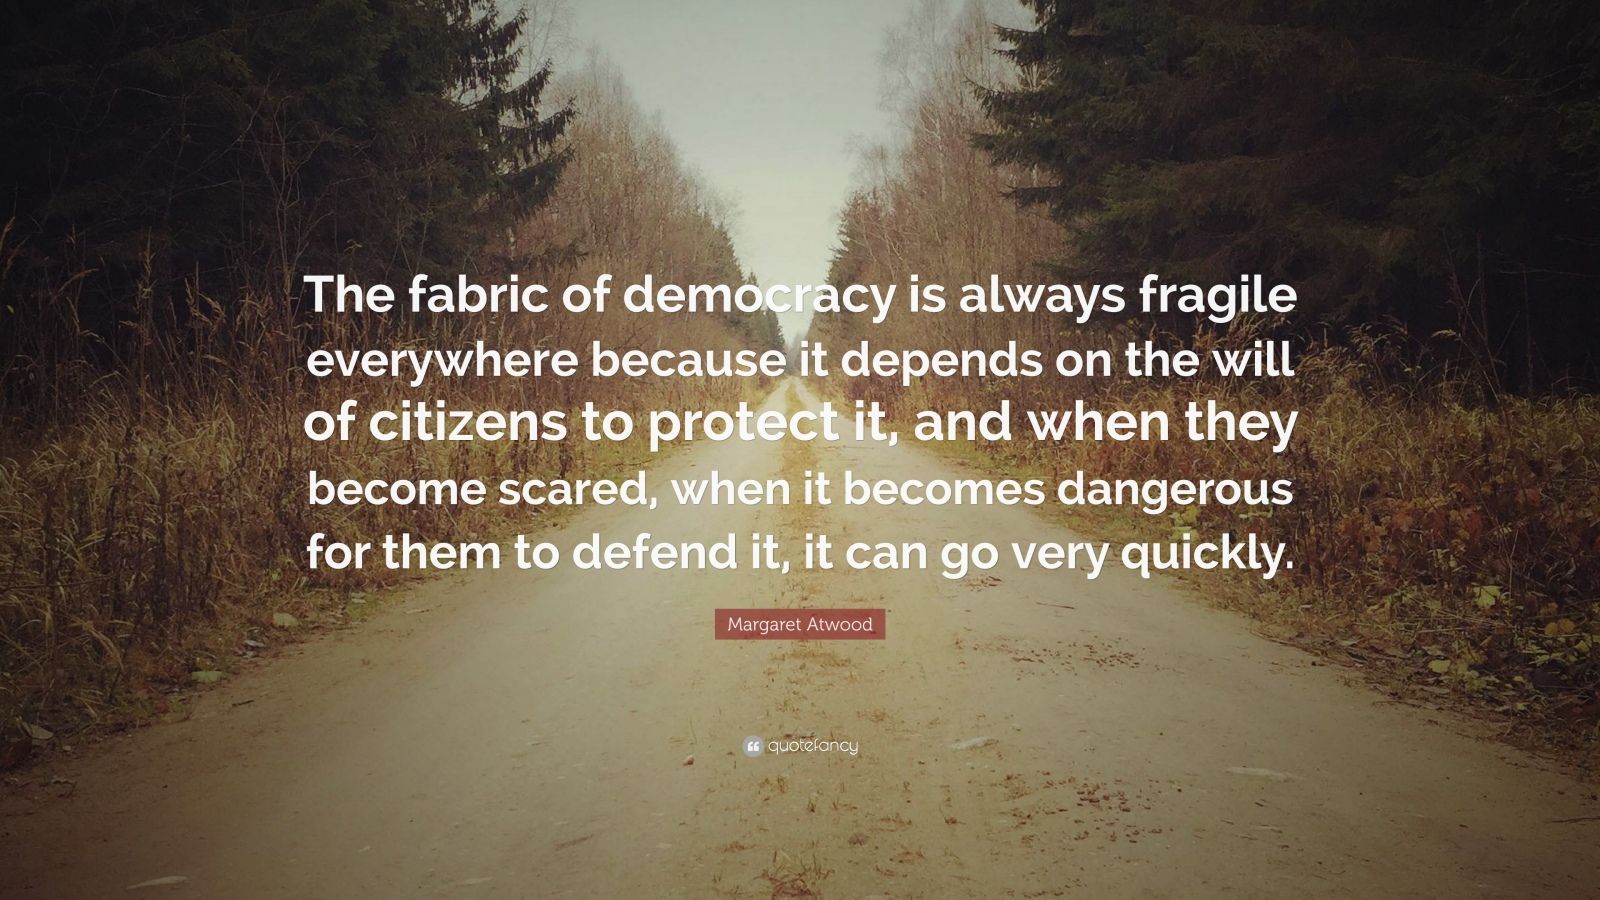 Margaret Atwood Quote: “The fabric of democracy is always fragile